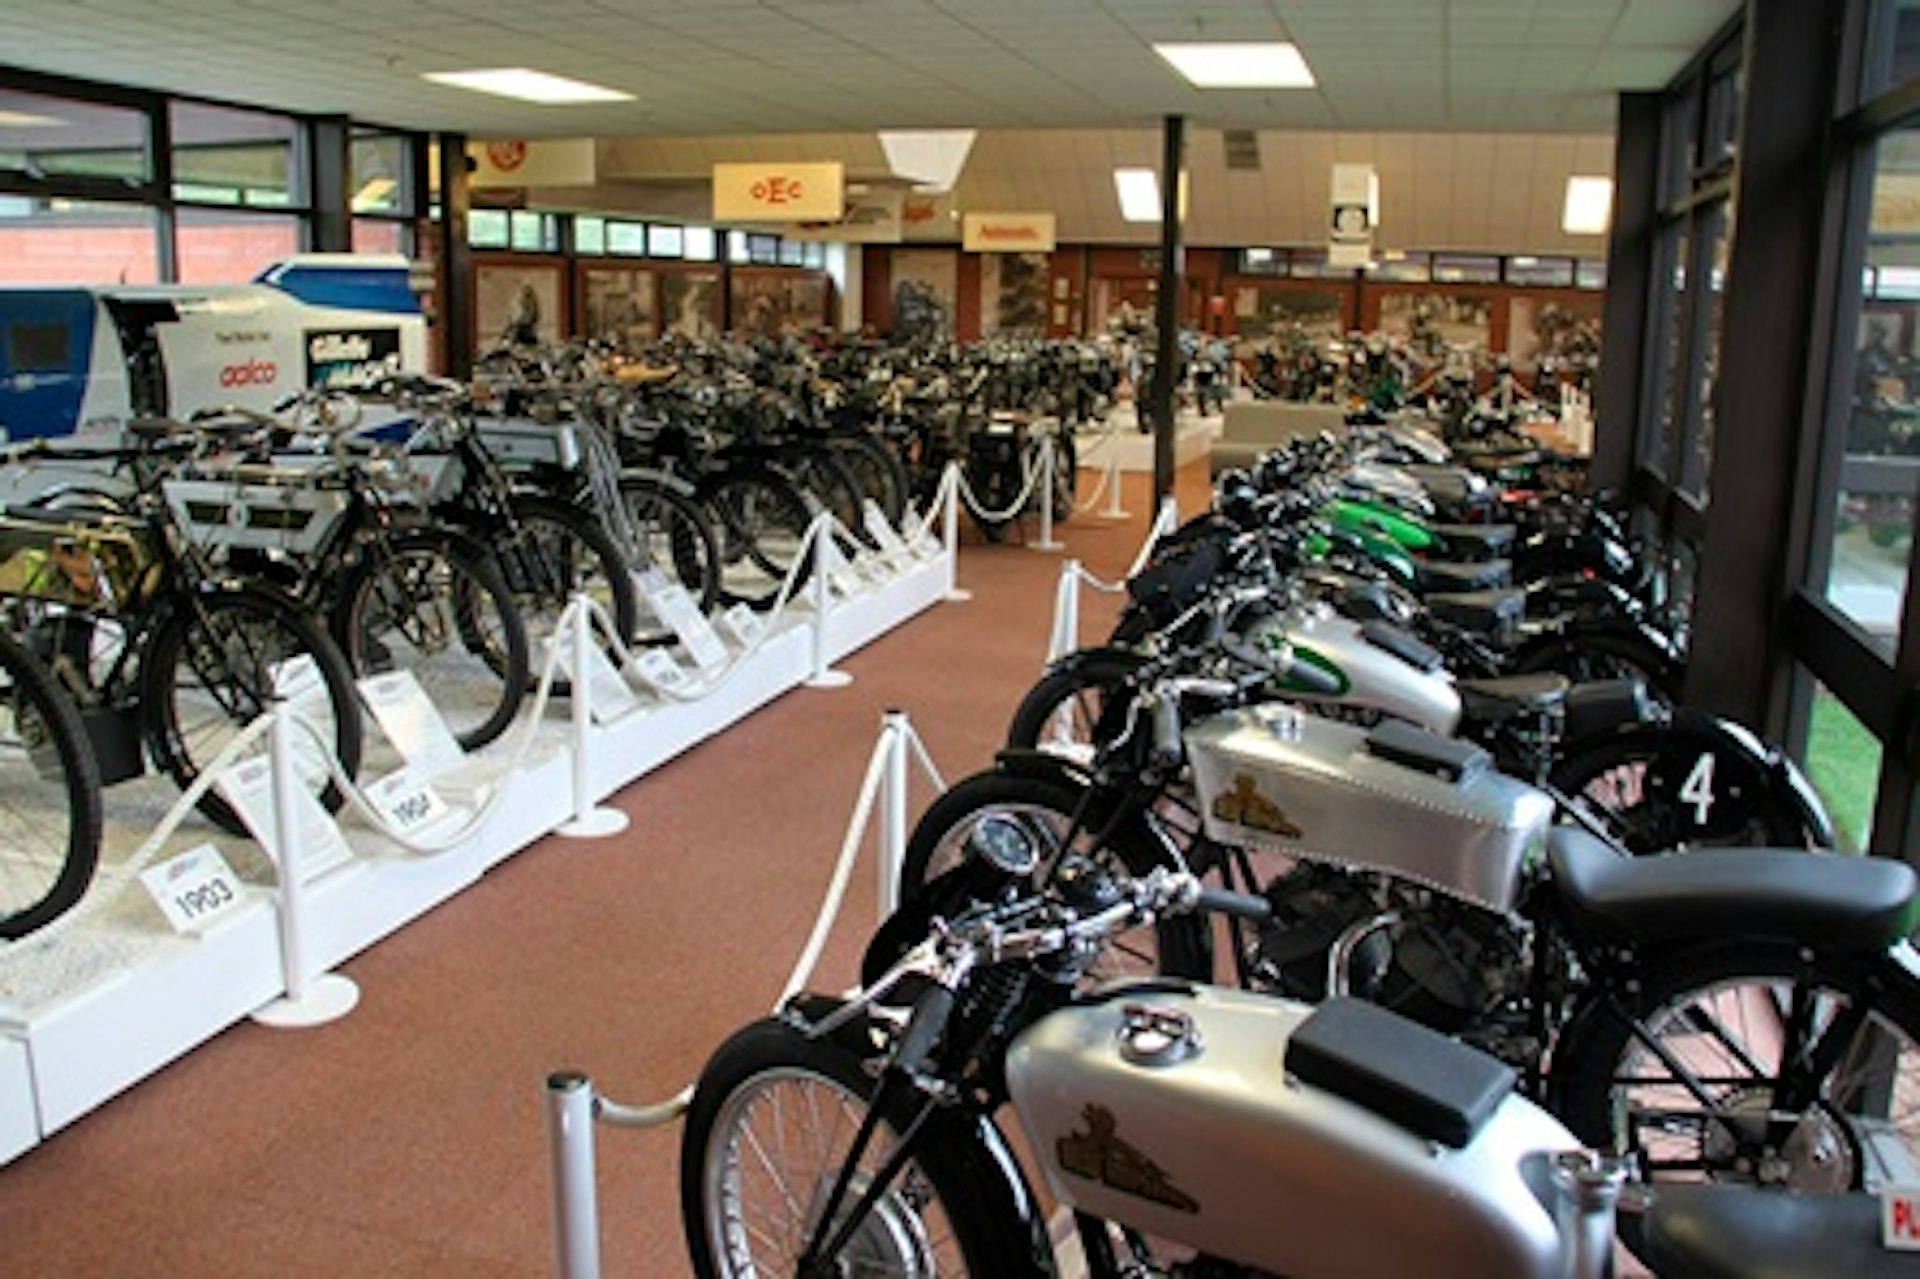 Visit to The National Motorcycle Museum for Two Adults and Two Children 1